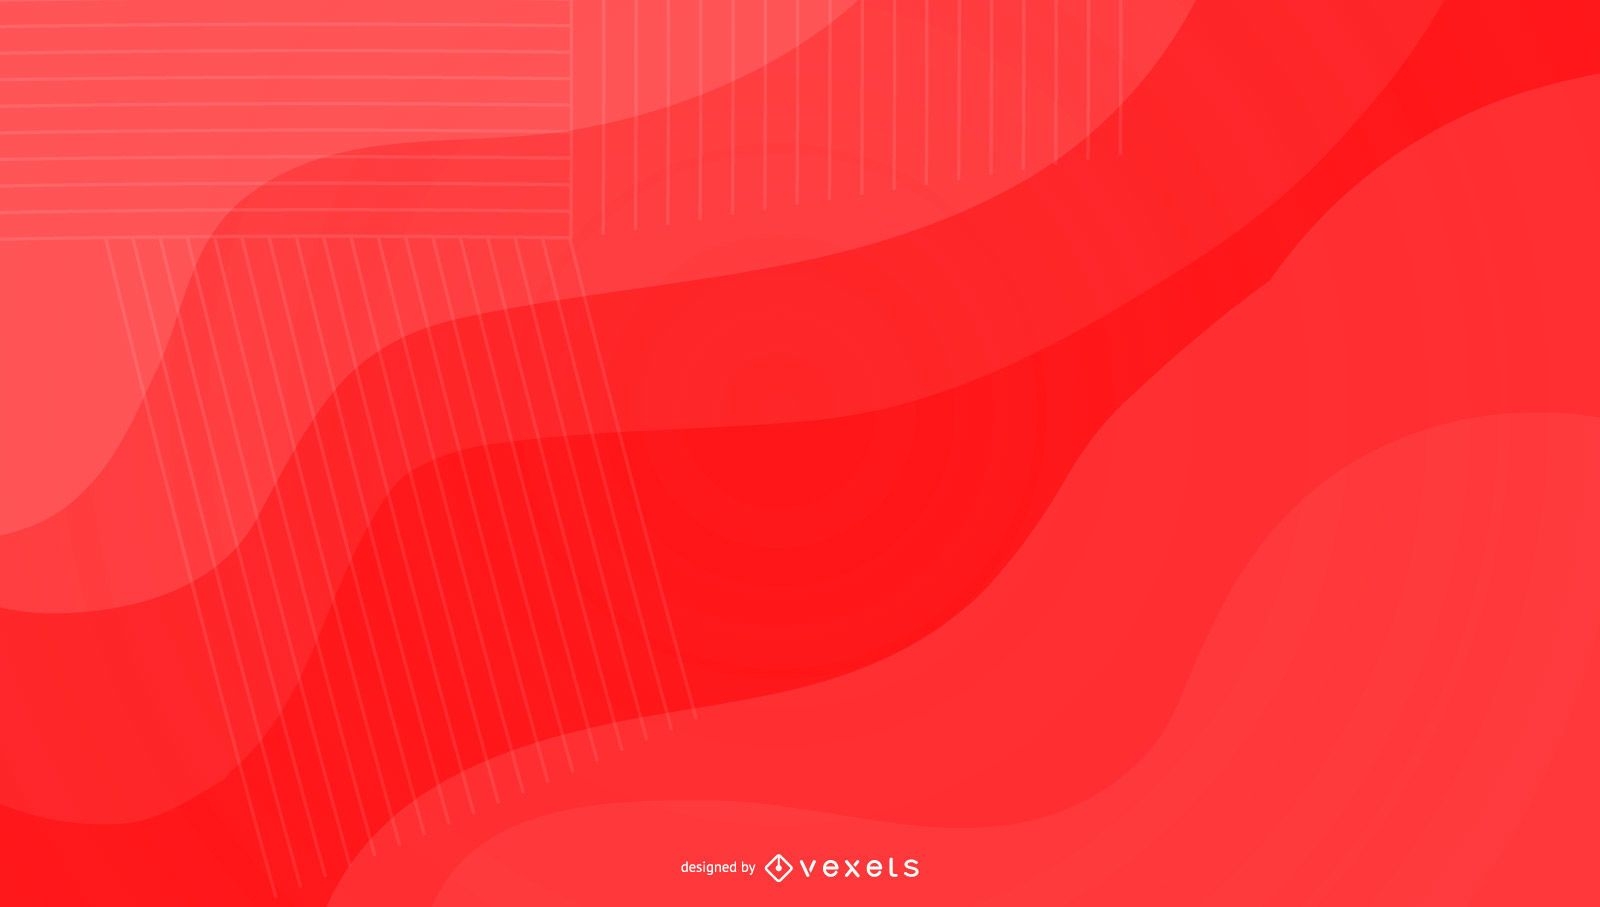 Bright Red Background Design Vector Download